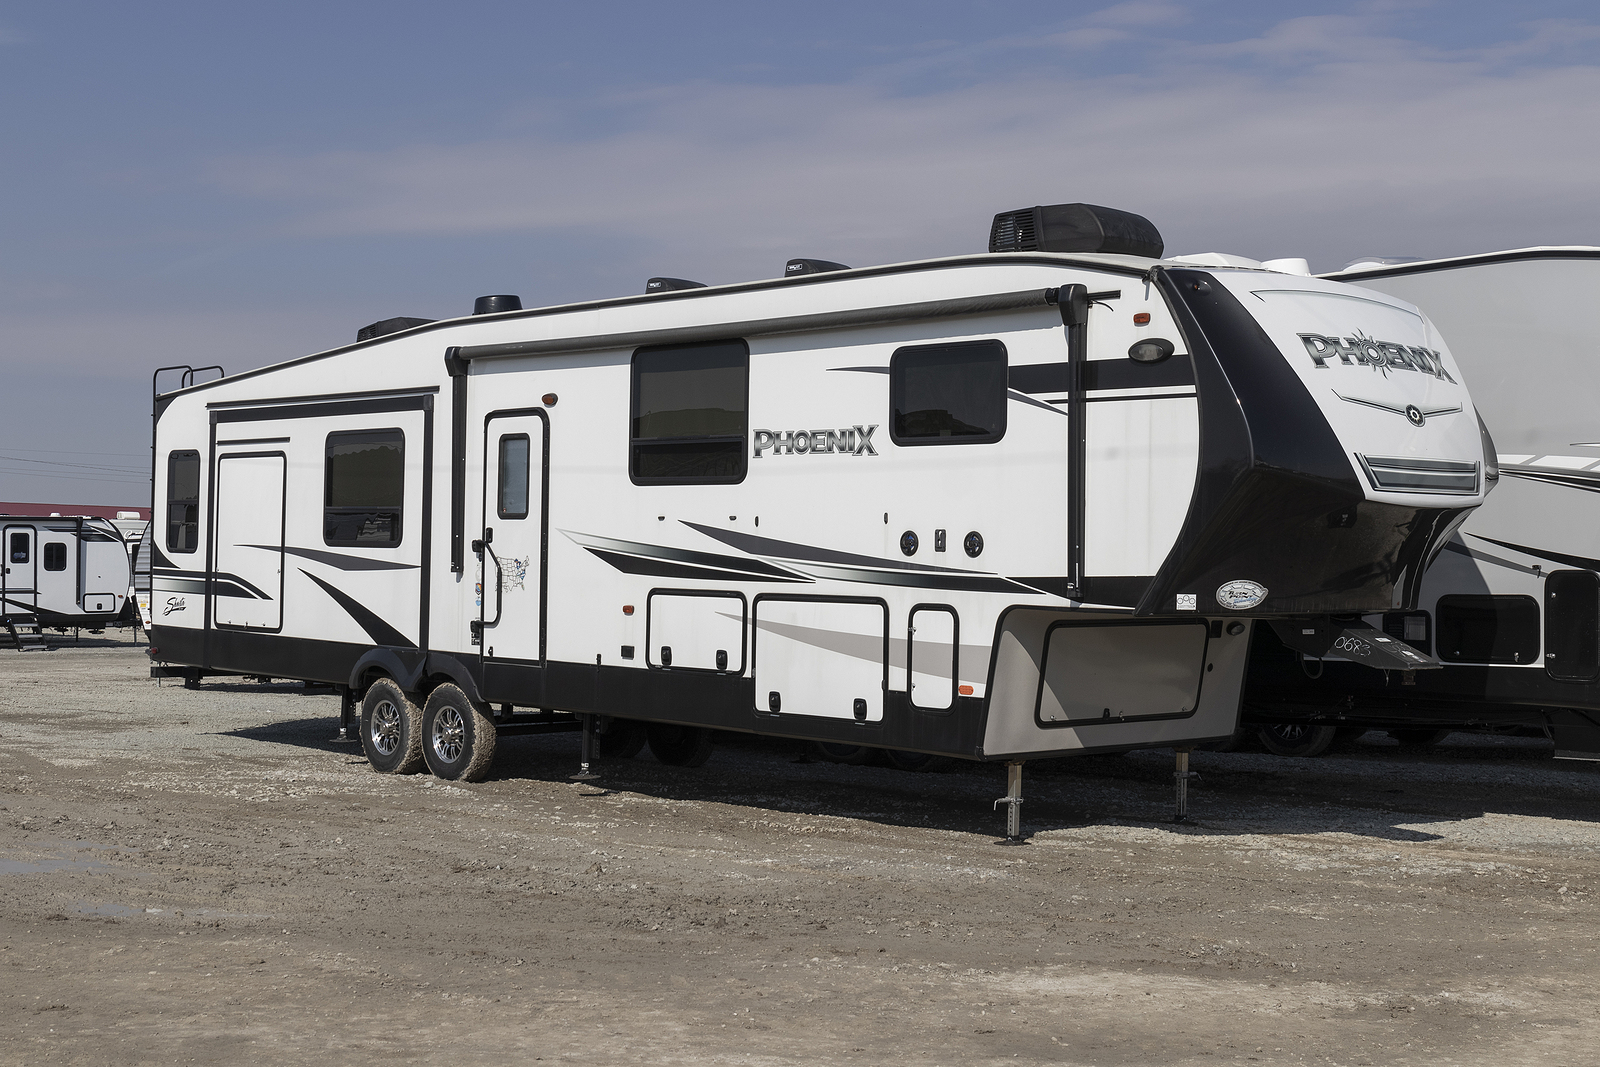 Bunker Hill - Circa March 2022: Shasta RV Phoenix model fifth wheel. Shasta RV is part of the Forest River RV family and a subsidiary of Berkshire Hathaway.